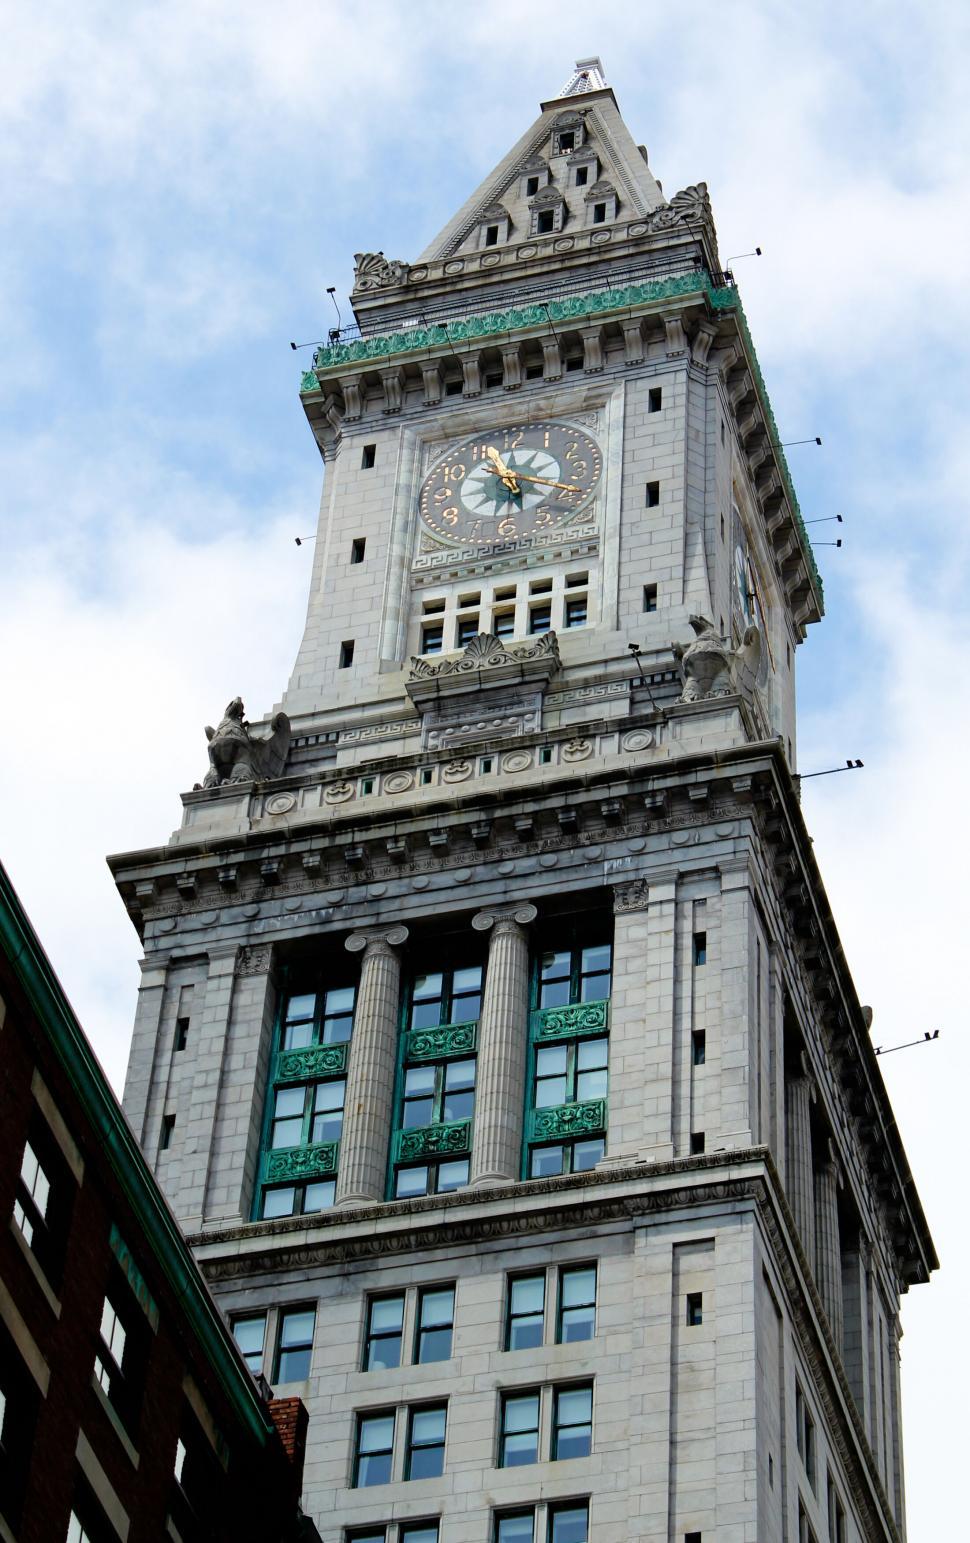 Free Image of Historic clock tower amidst modern buildings 